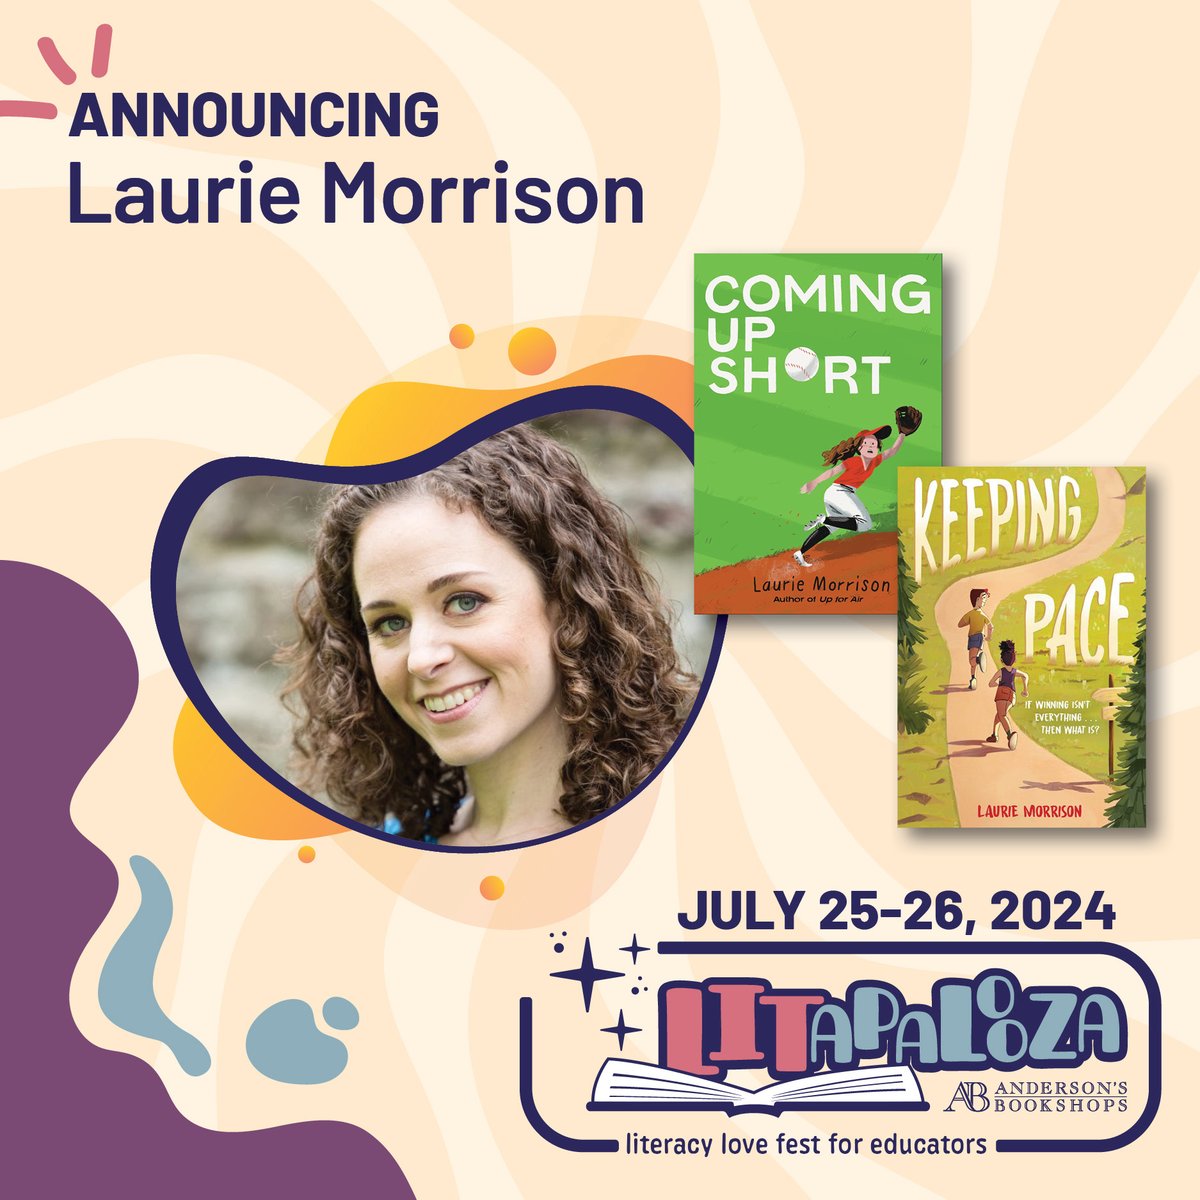 #LITfriday means more author announcements! YOU can meet Laurie Morrison @LaurieLMorrison when you attend our lovefest for literacy - LITapalooza! Spend two days learning at this educator-focused conference! REGISTER HERE: LITapalooza2024.eventcombo.com